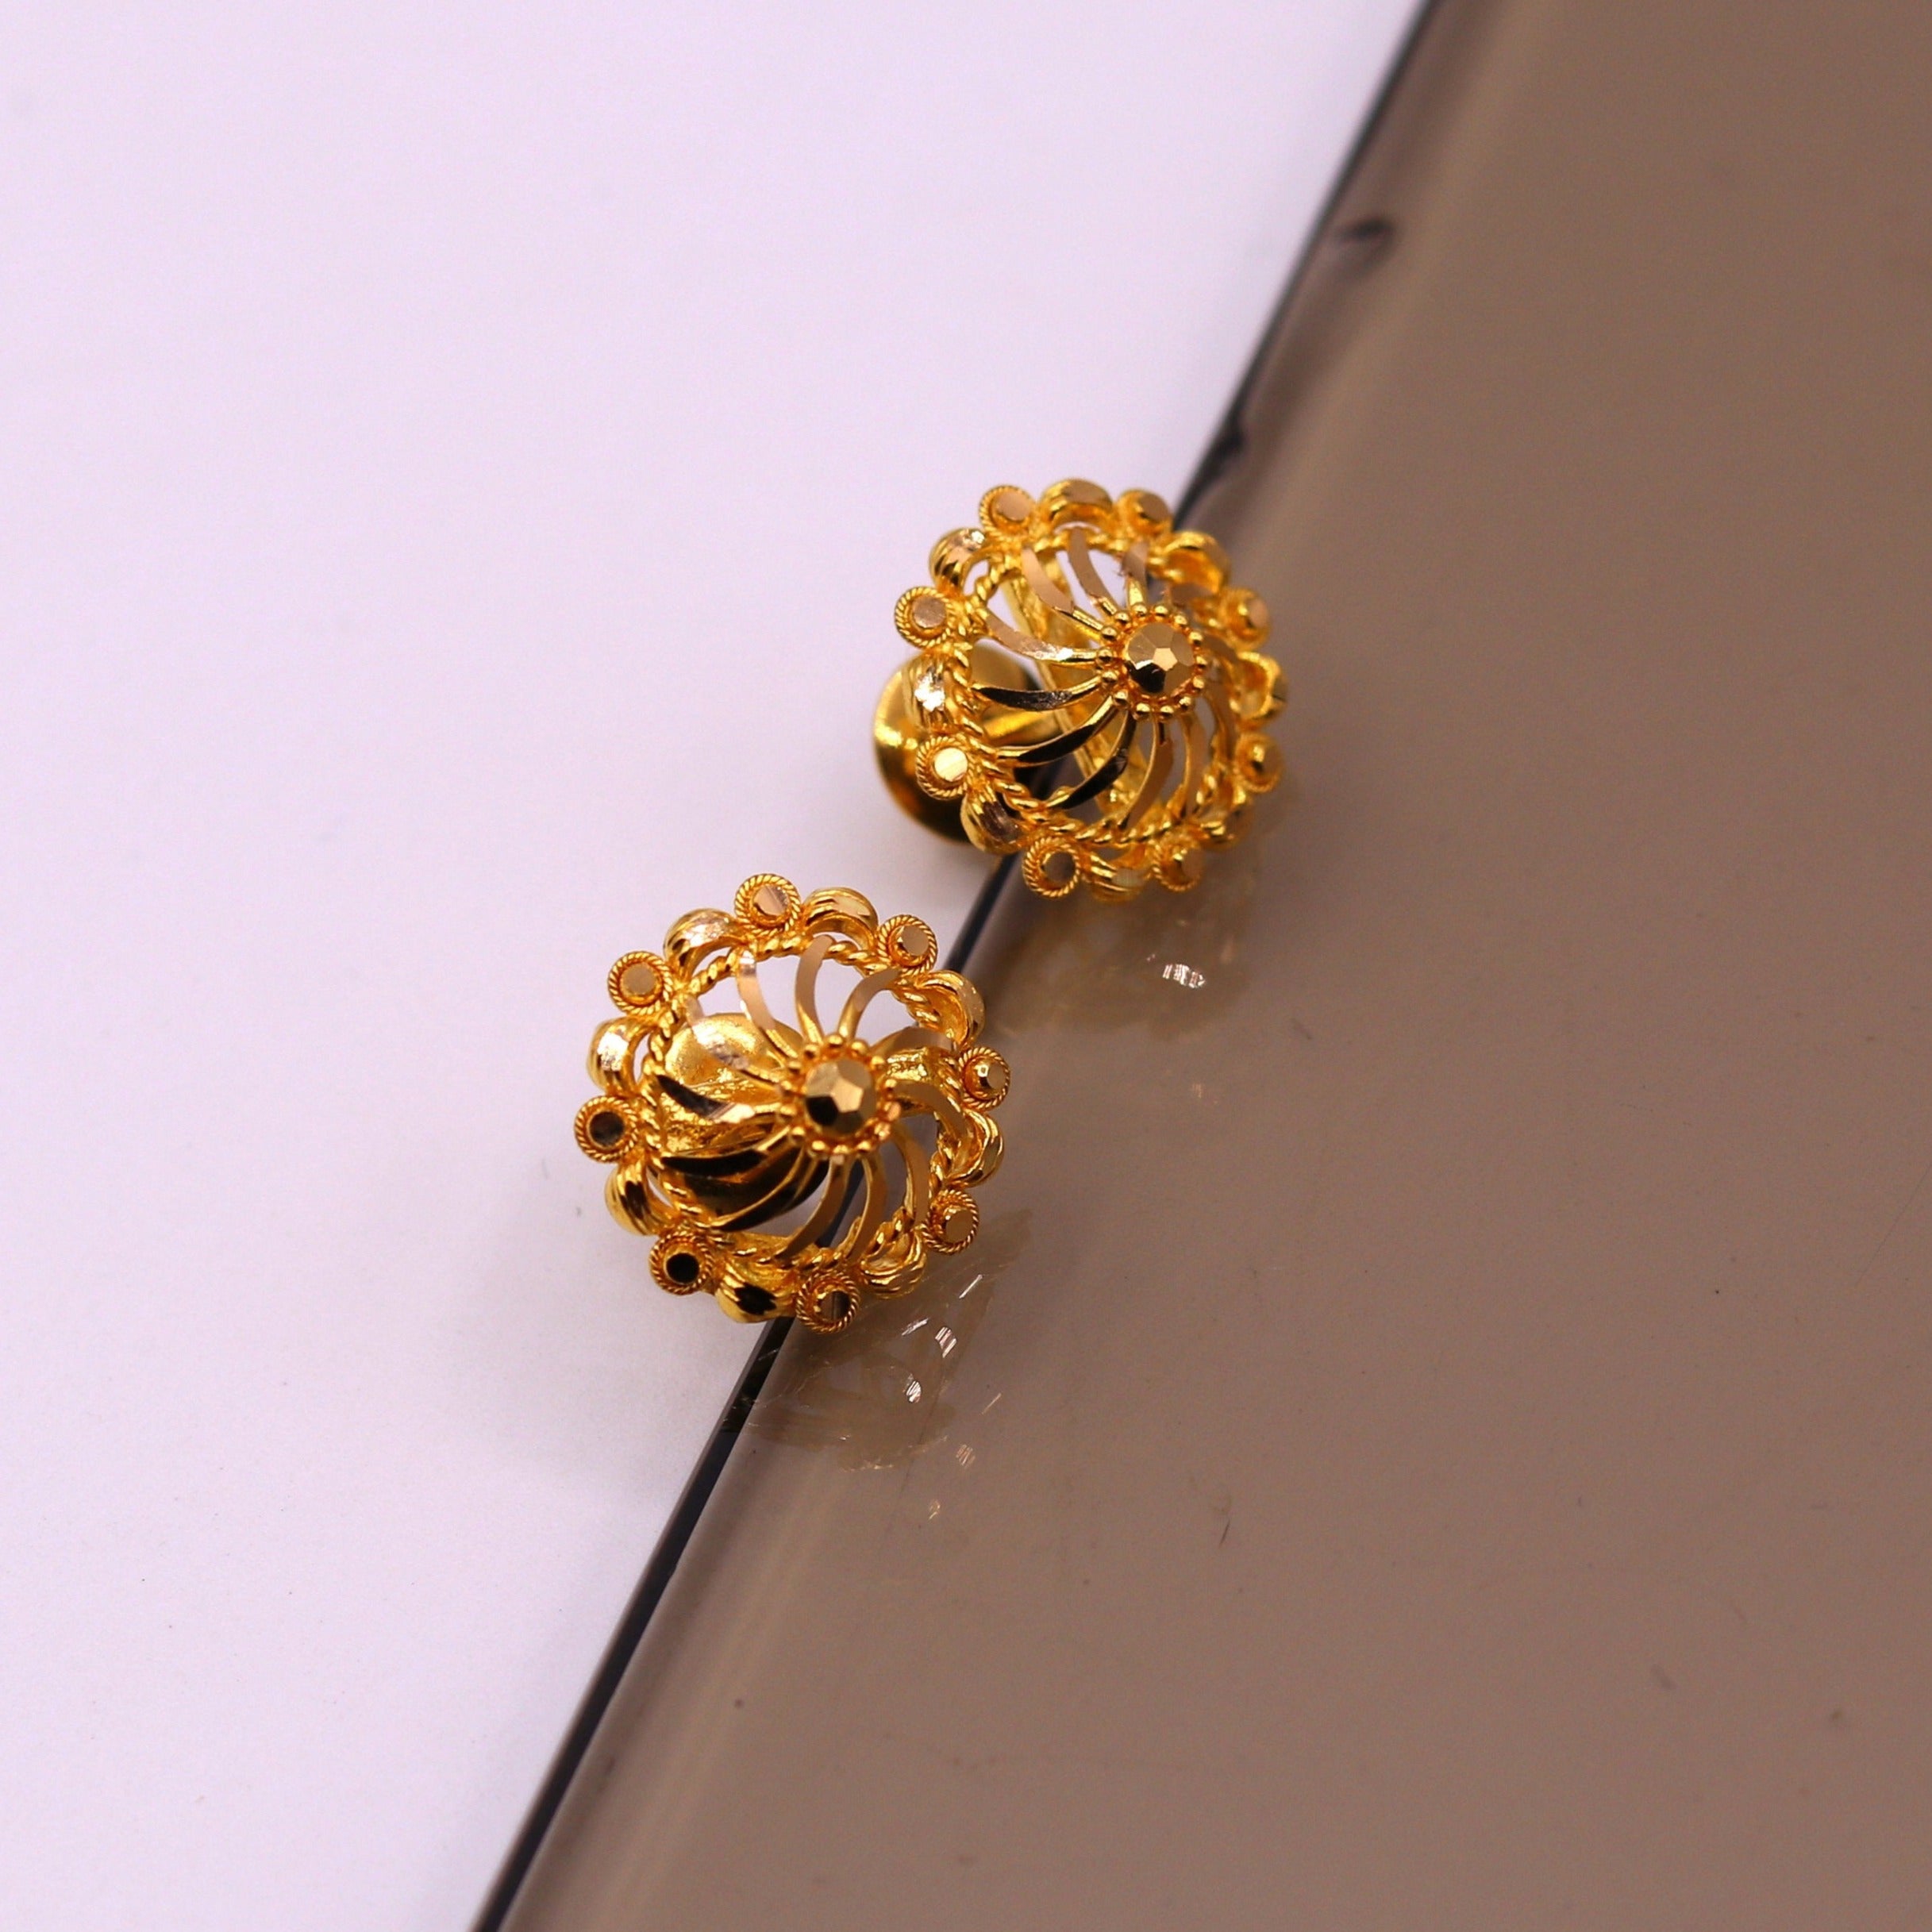 Update more than 286 real gold earrings